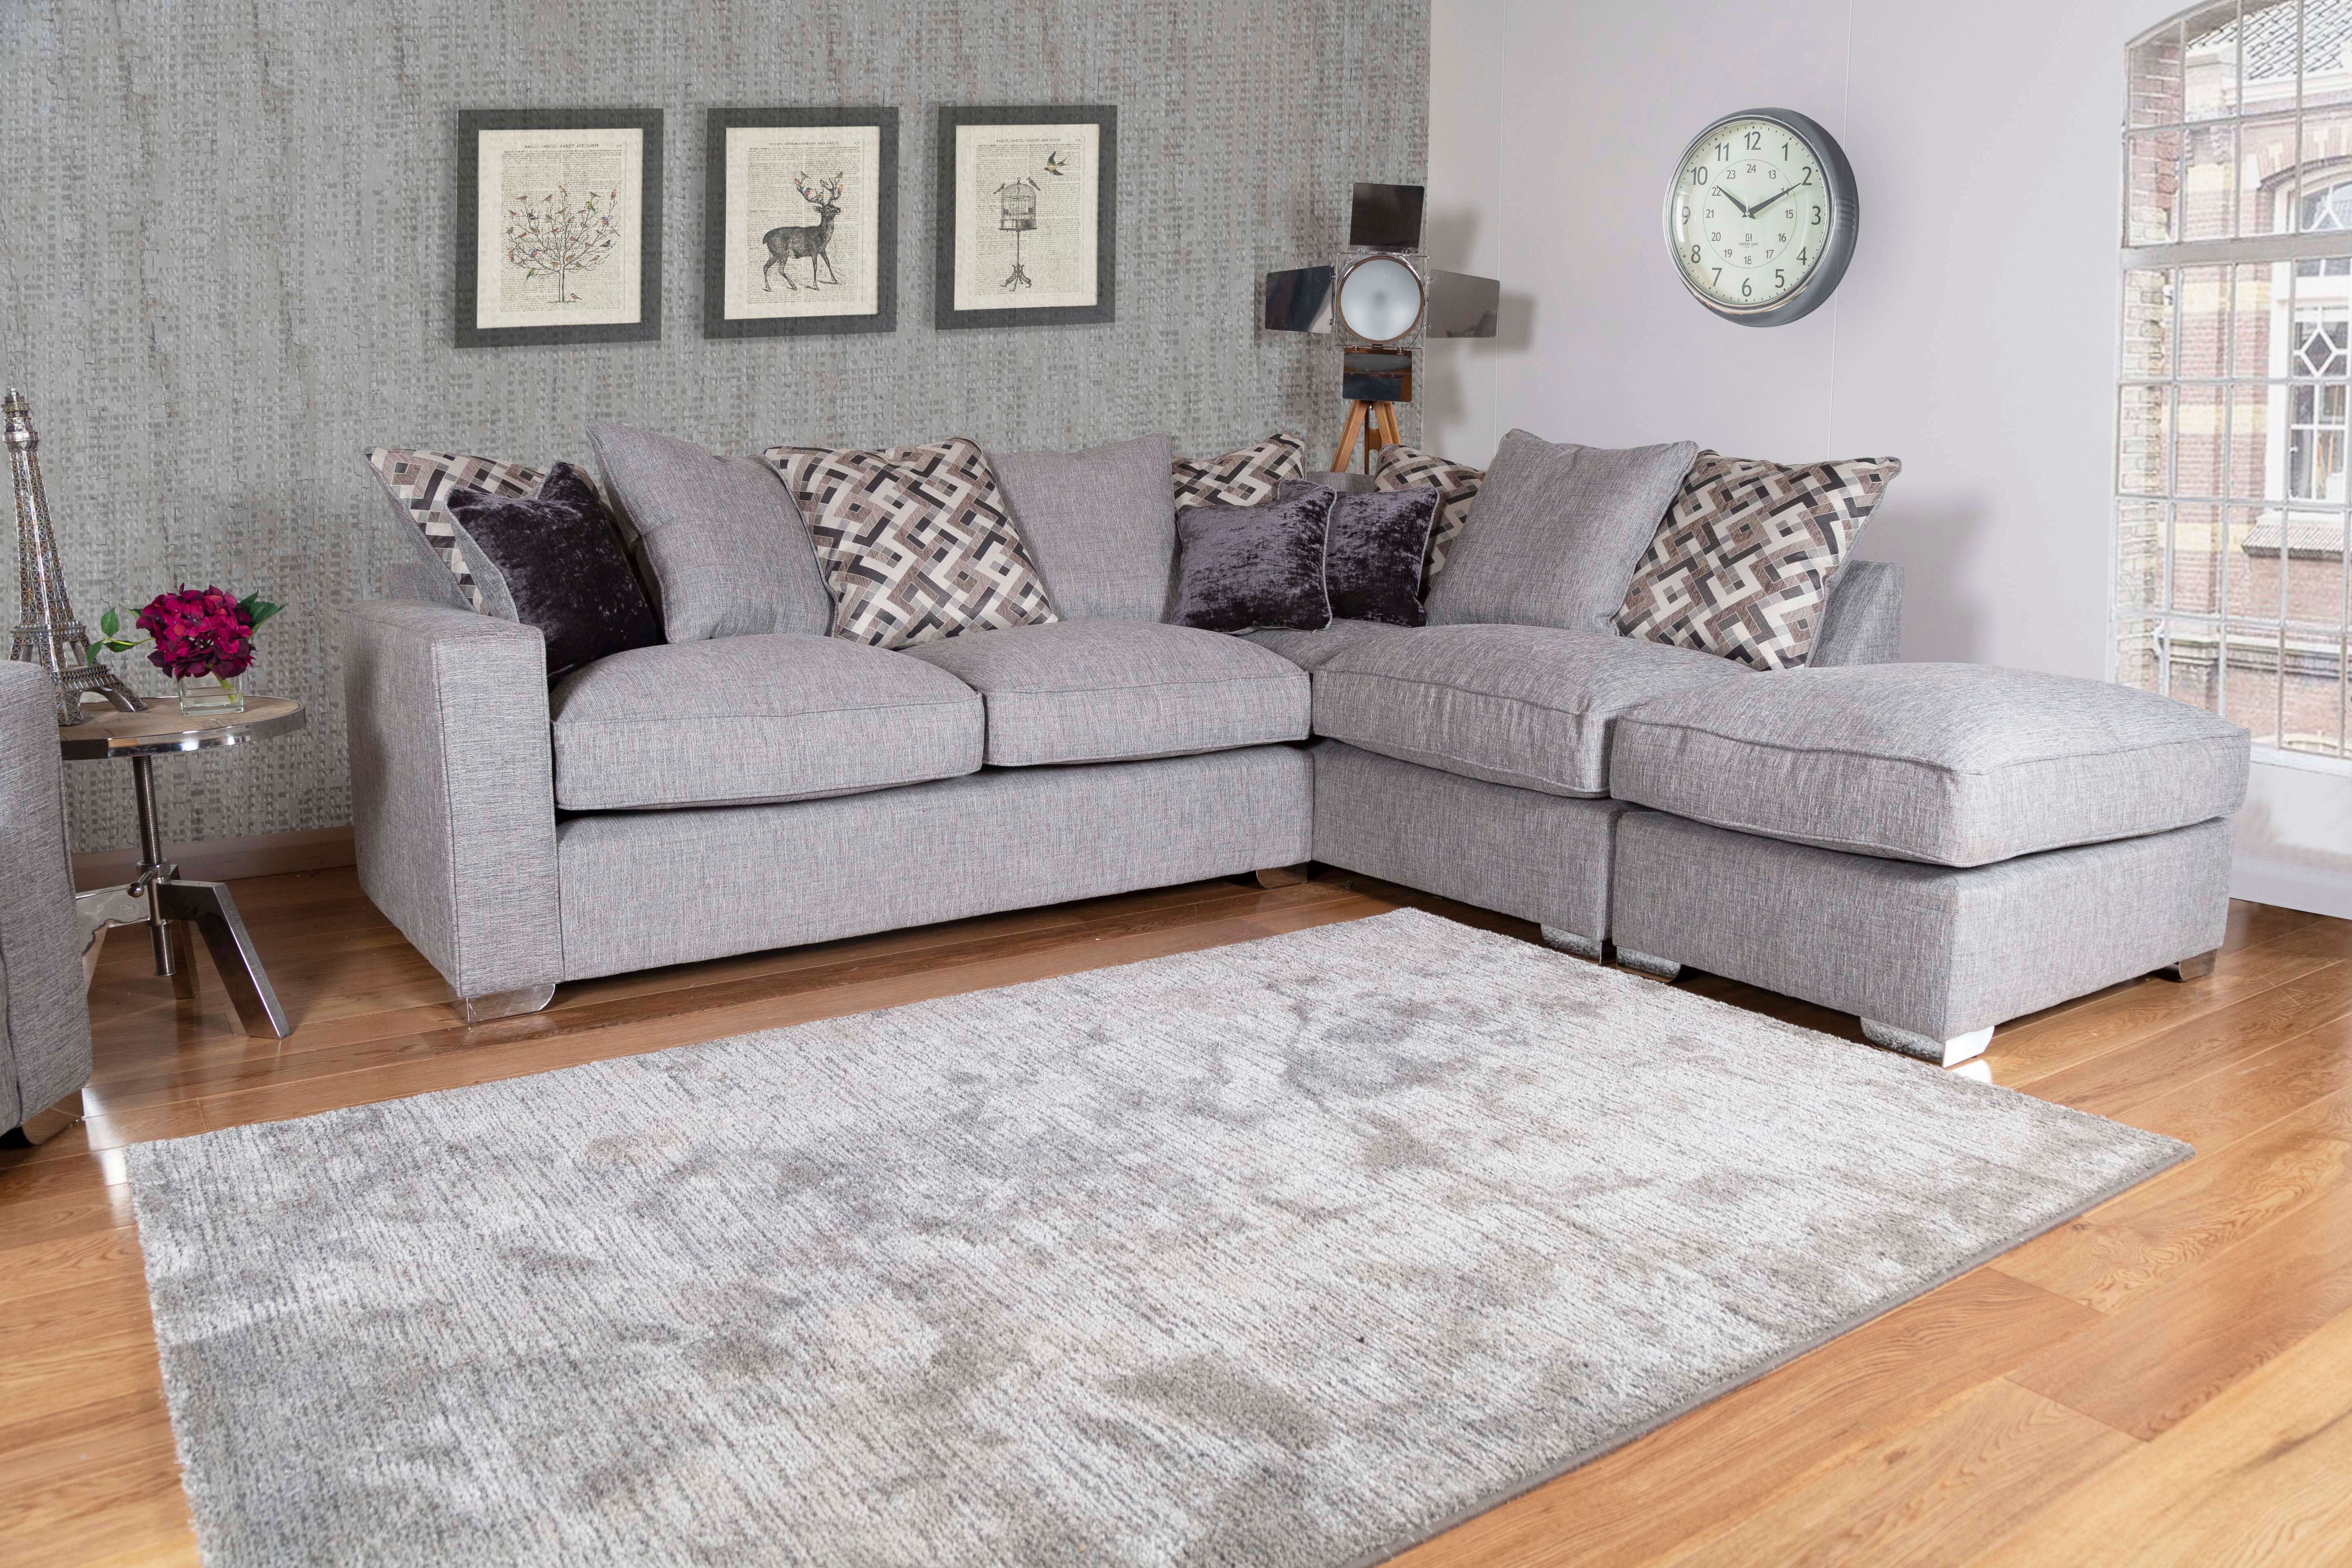 Showing image for Montpellier left corner chaise sofa + footstool